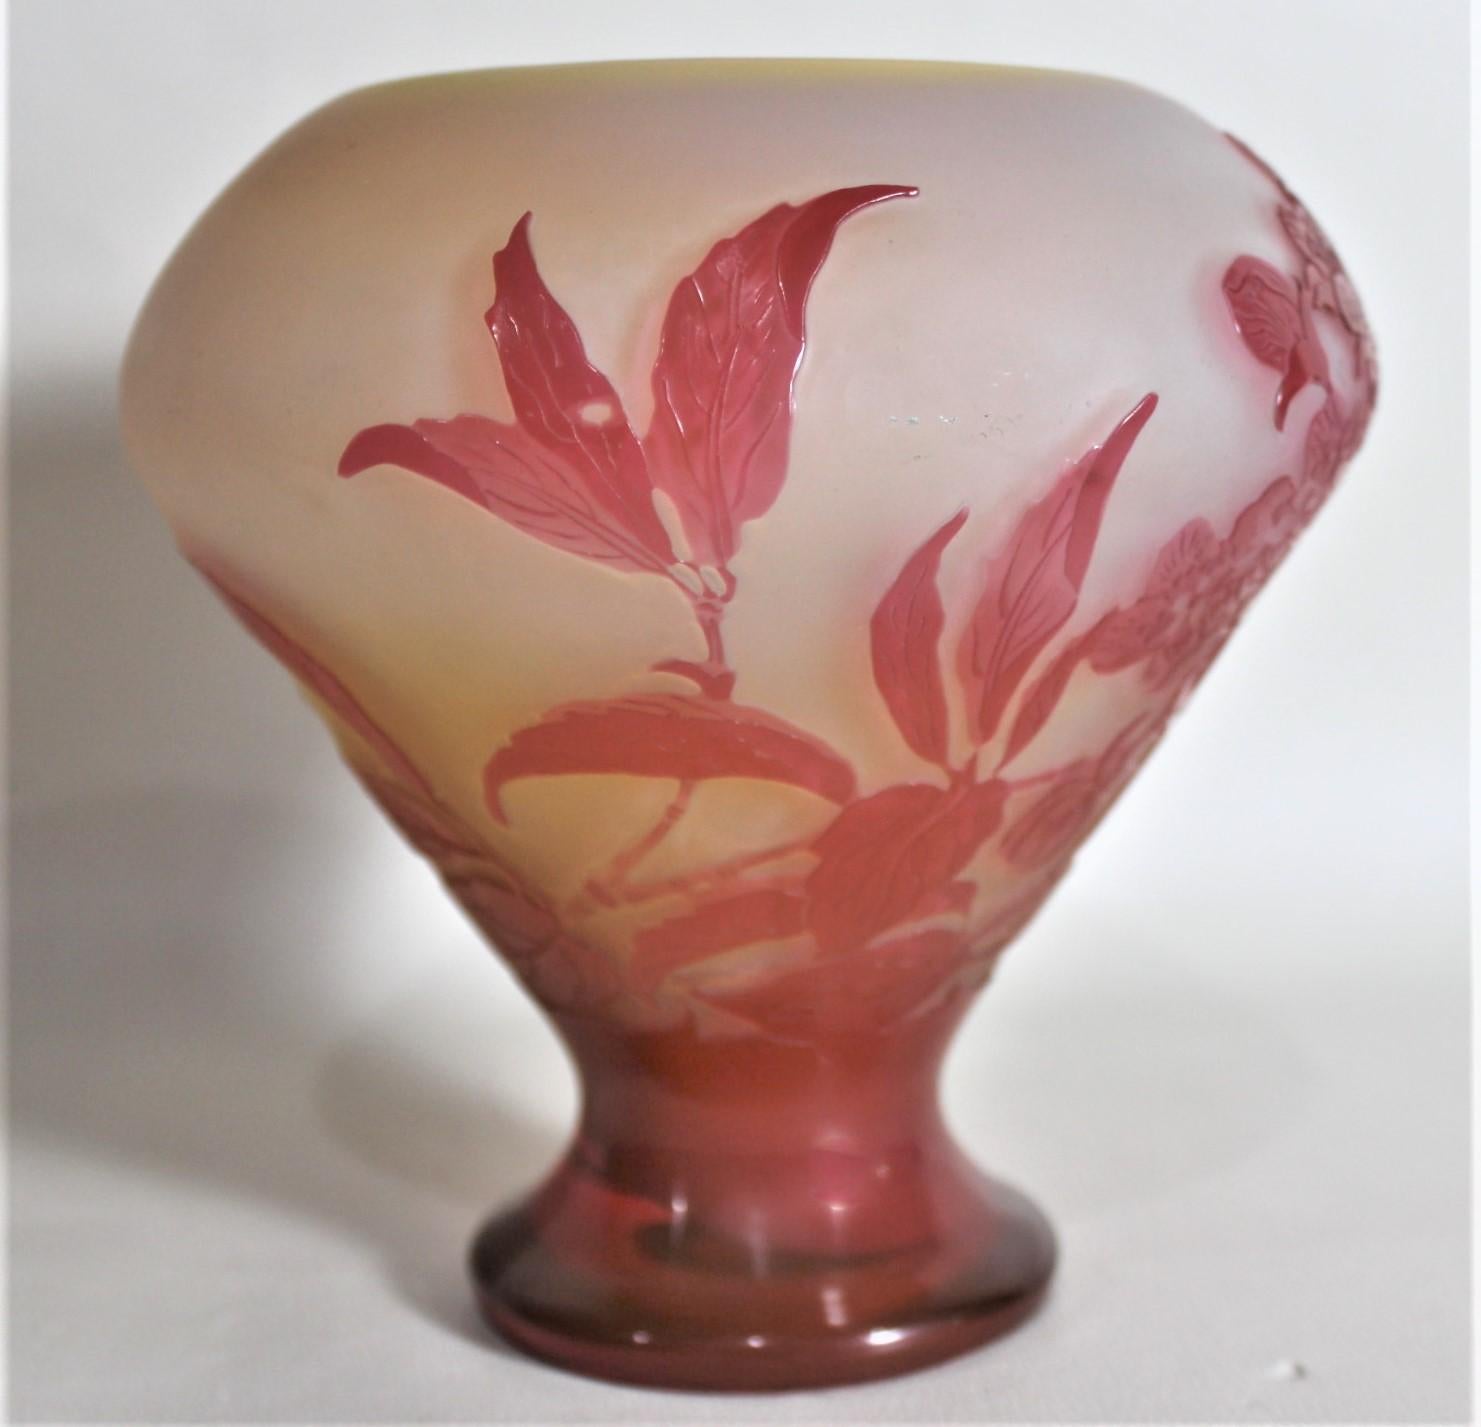 20th Century Emile Galle Cameo Art Glass Cabinet Vase with Exotic Floral and Leaf Decoration